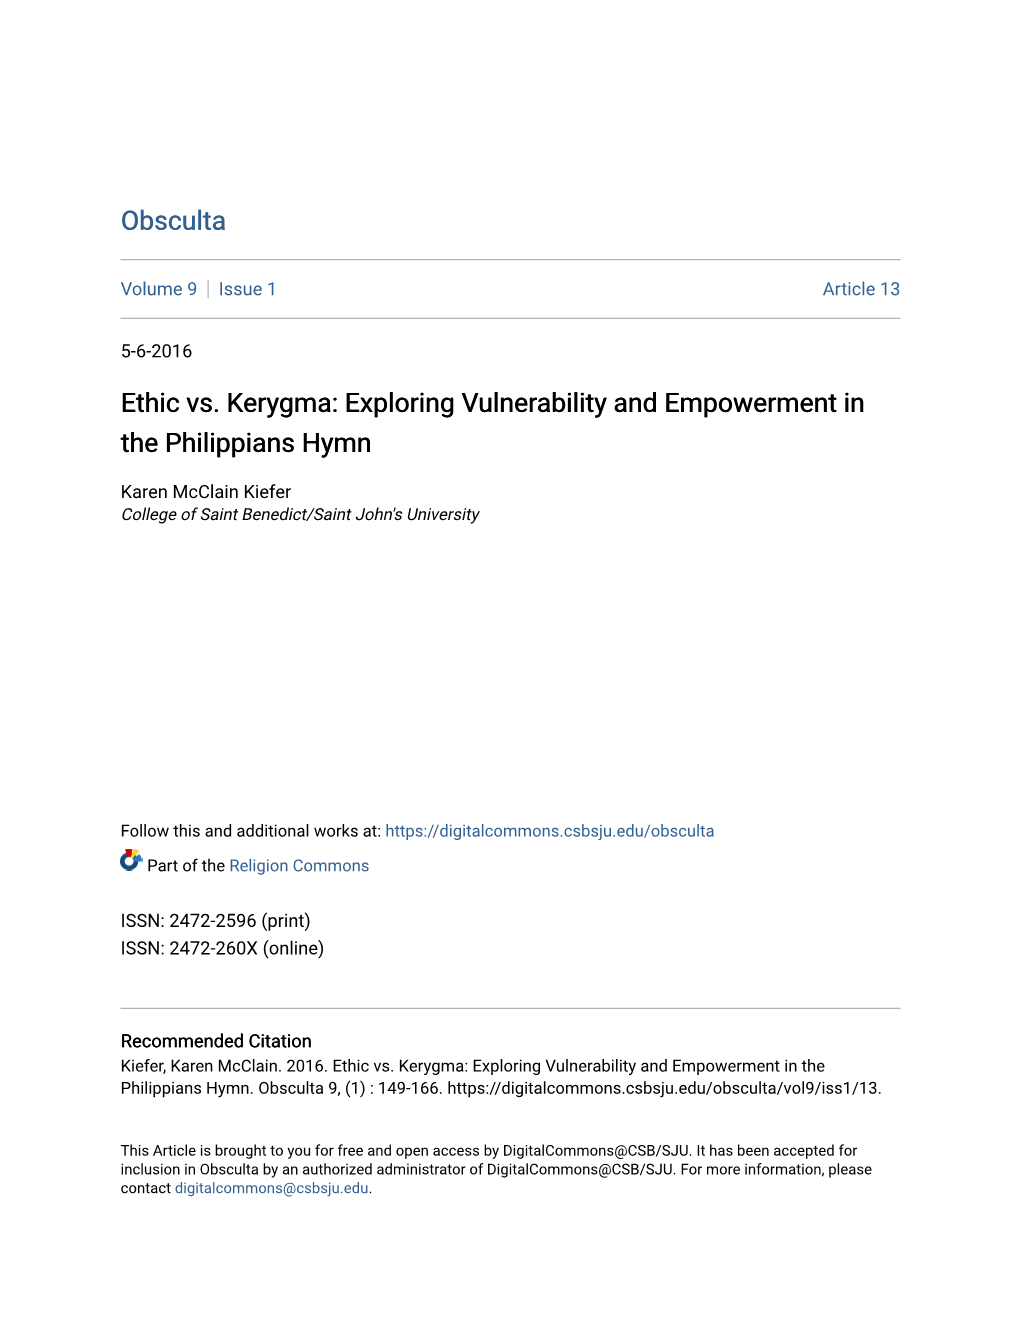 Ethic Vs. Kerygma: Exploring Vulnerability and Empowerment in the Philippians Hymn